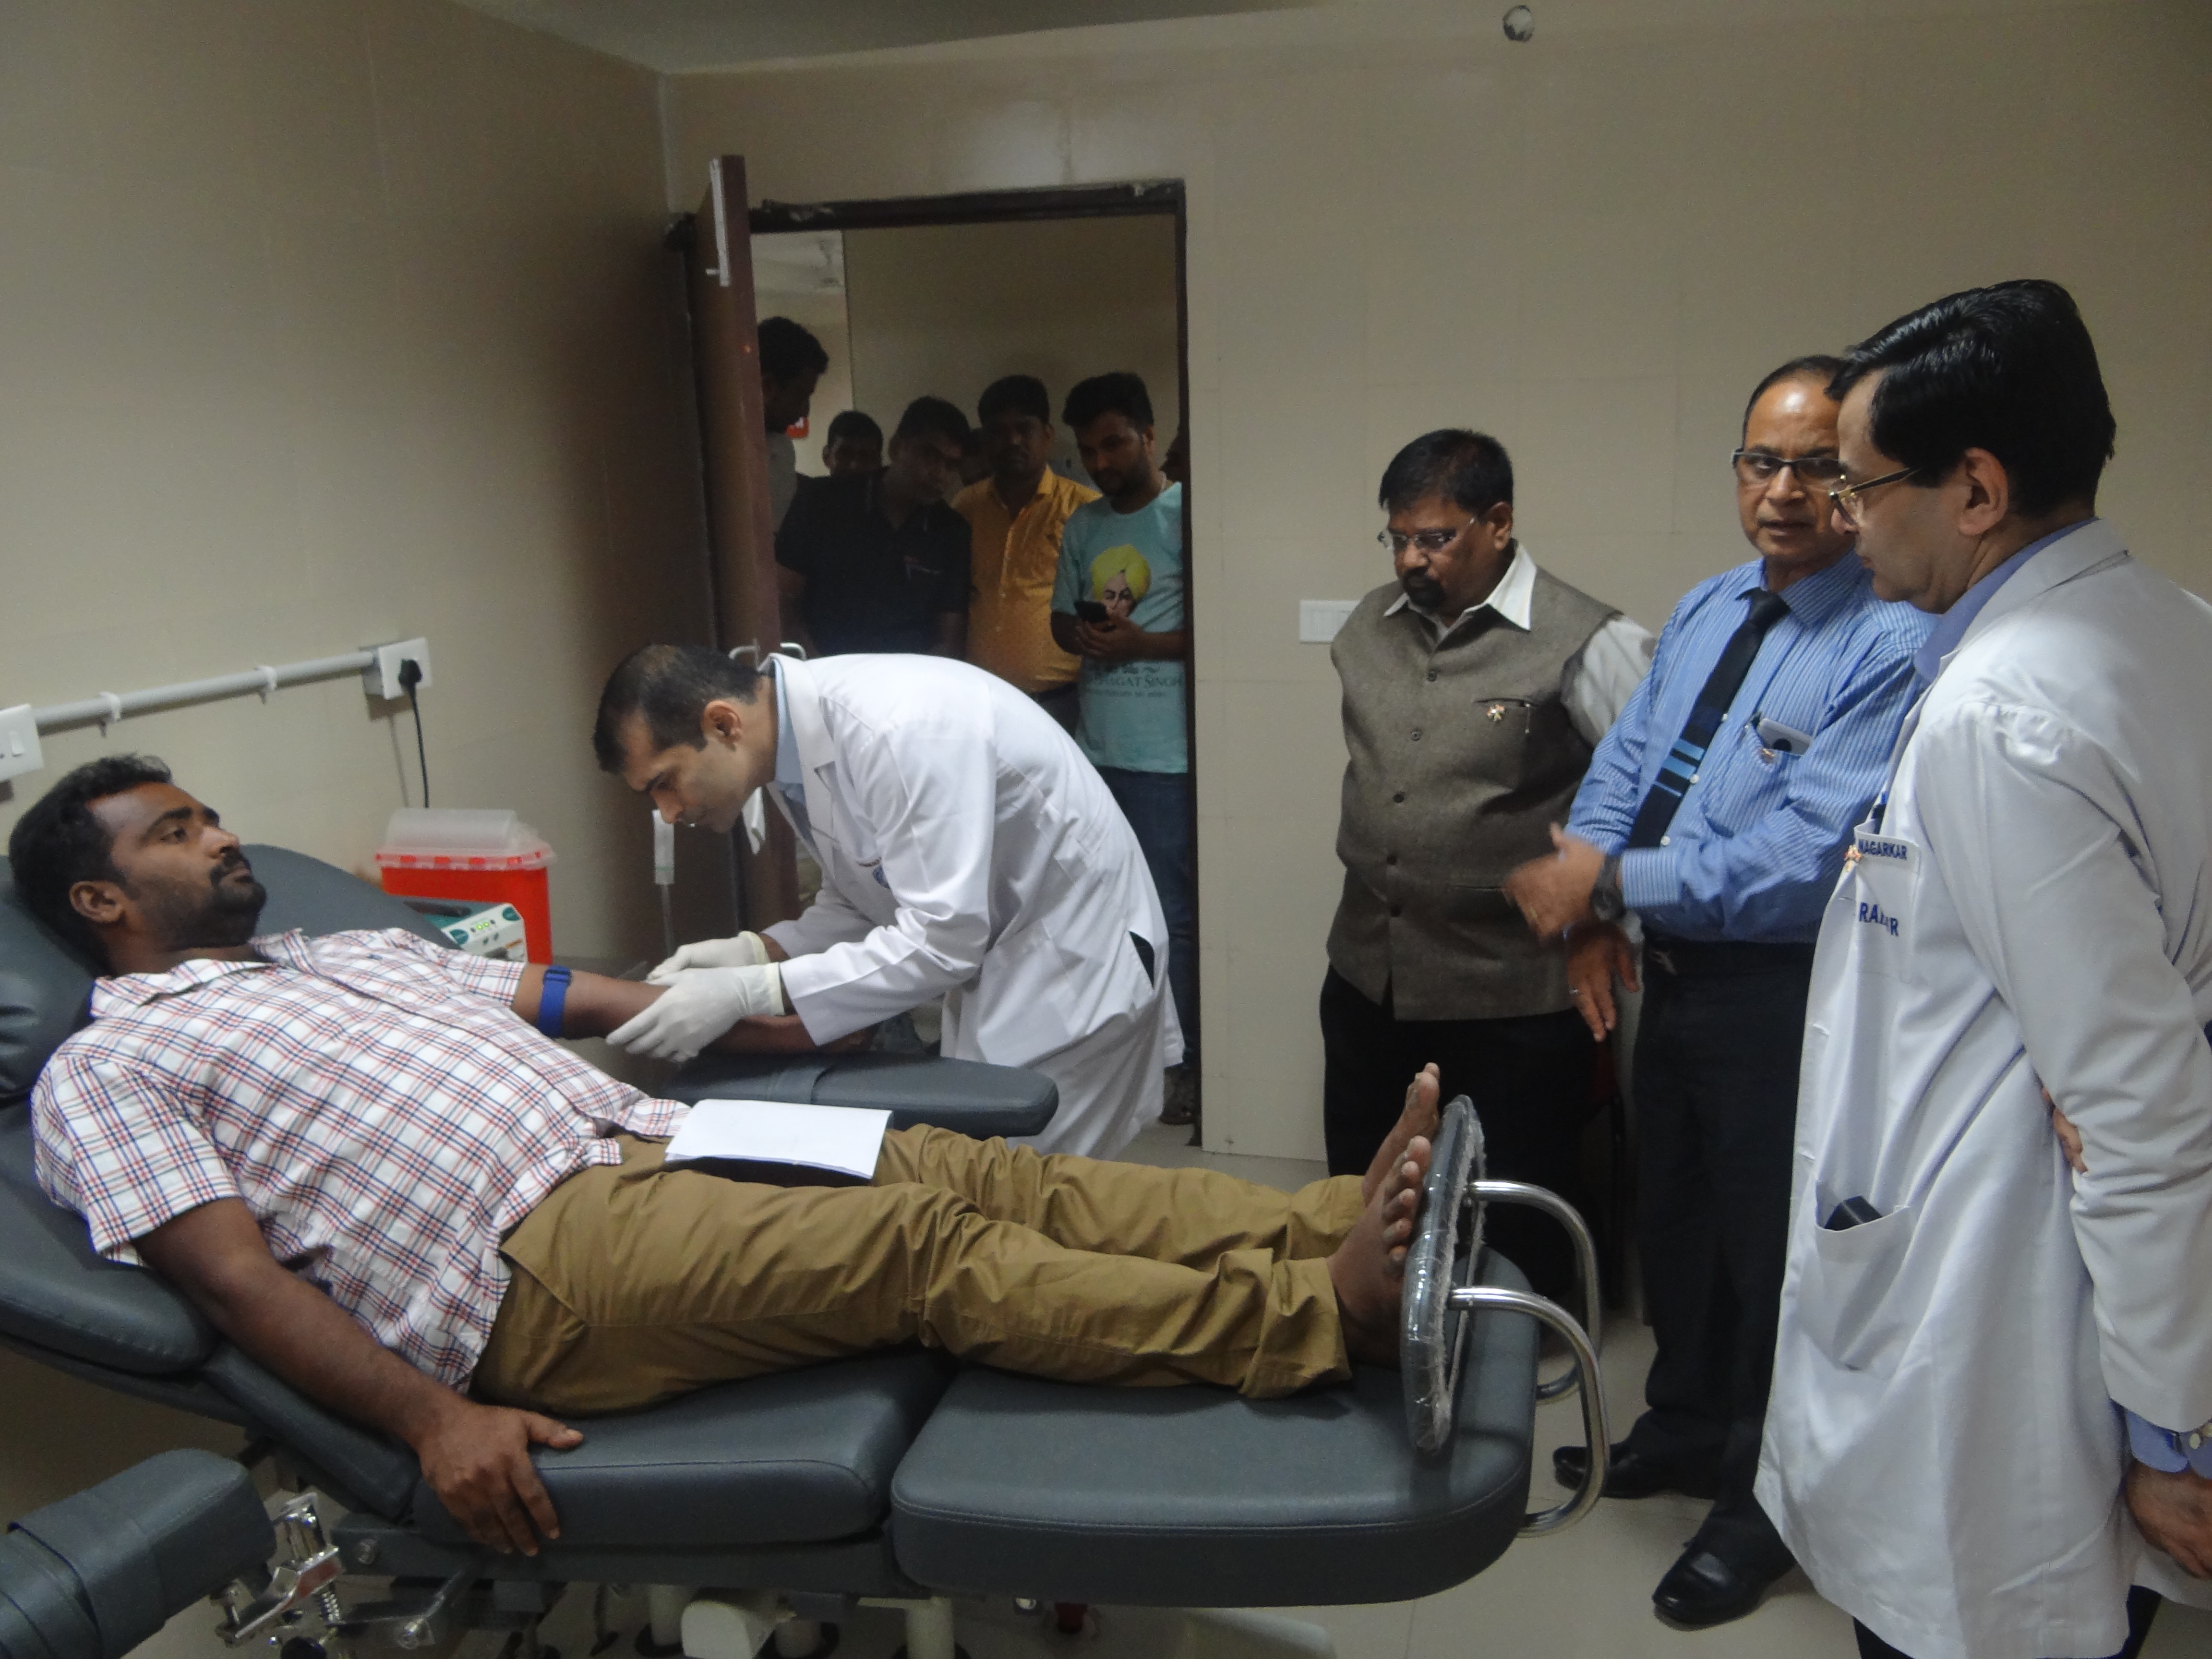 AIIMS Raipur organized a blood donation camp in the premises of Hospital Block.